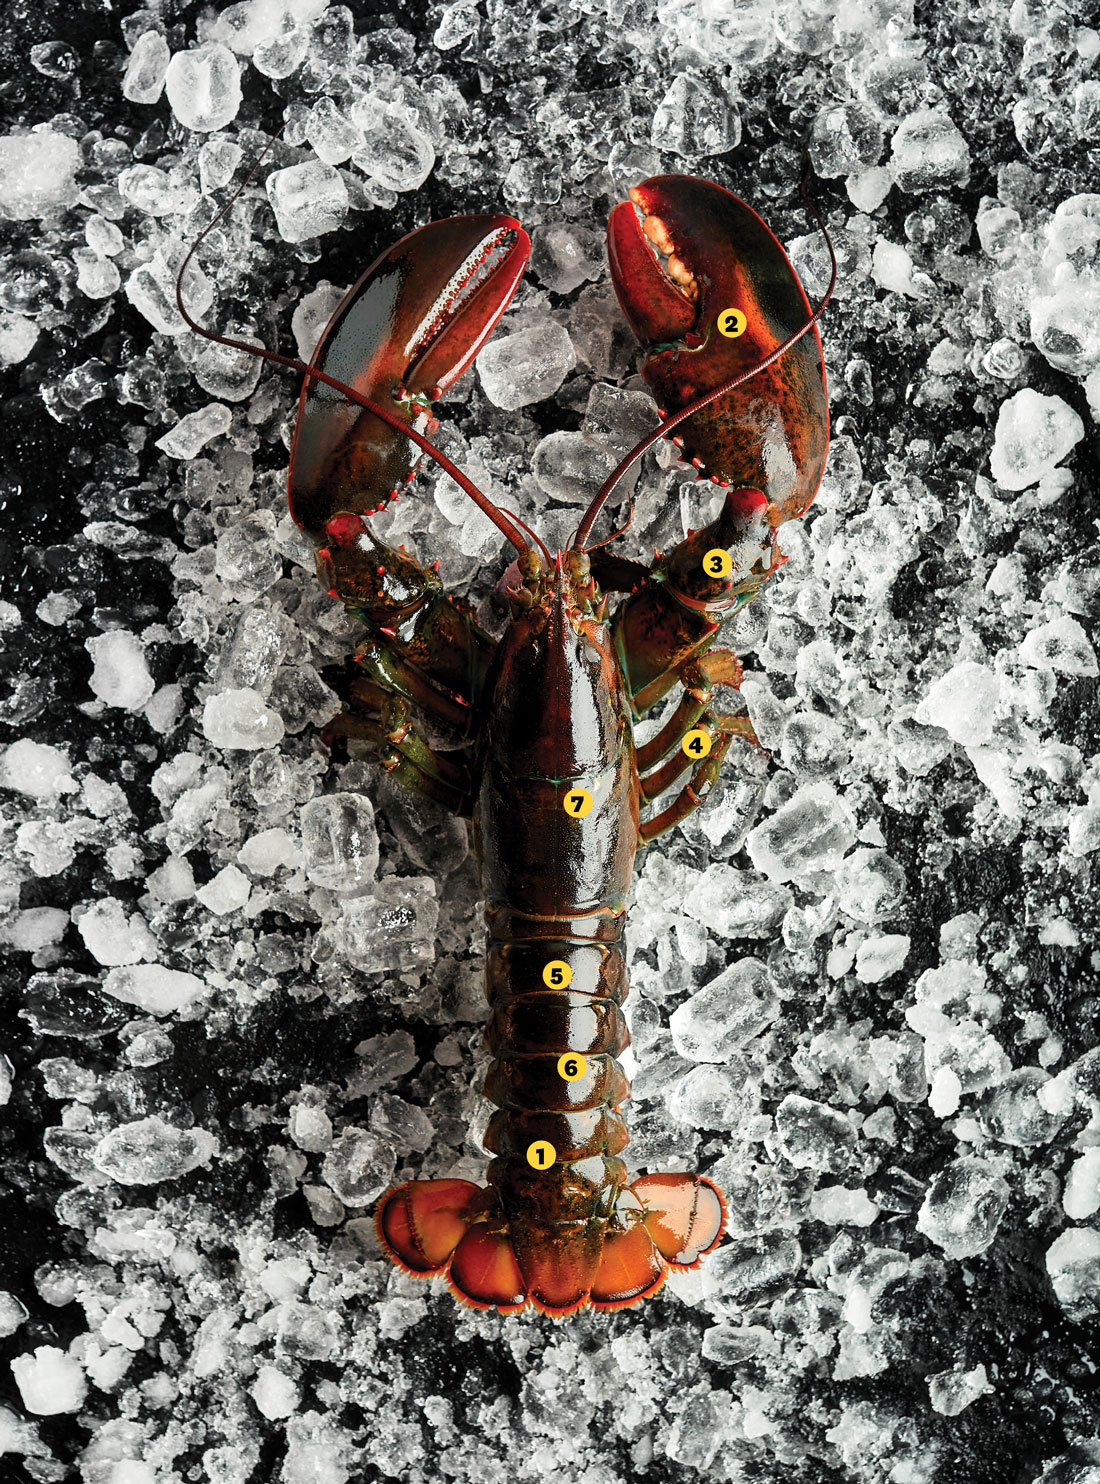 all the edible parts of a lobster